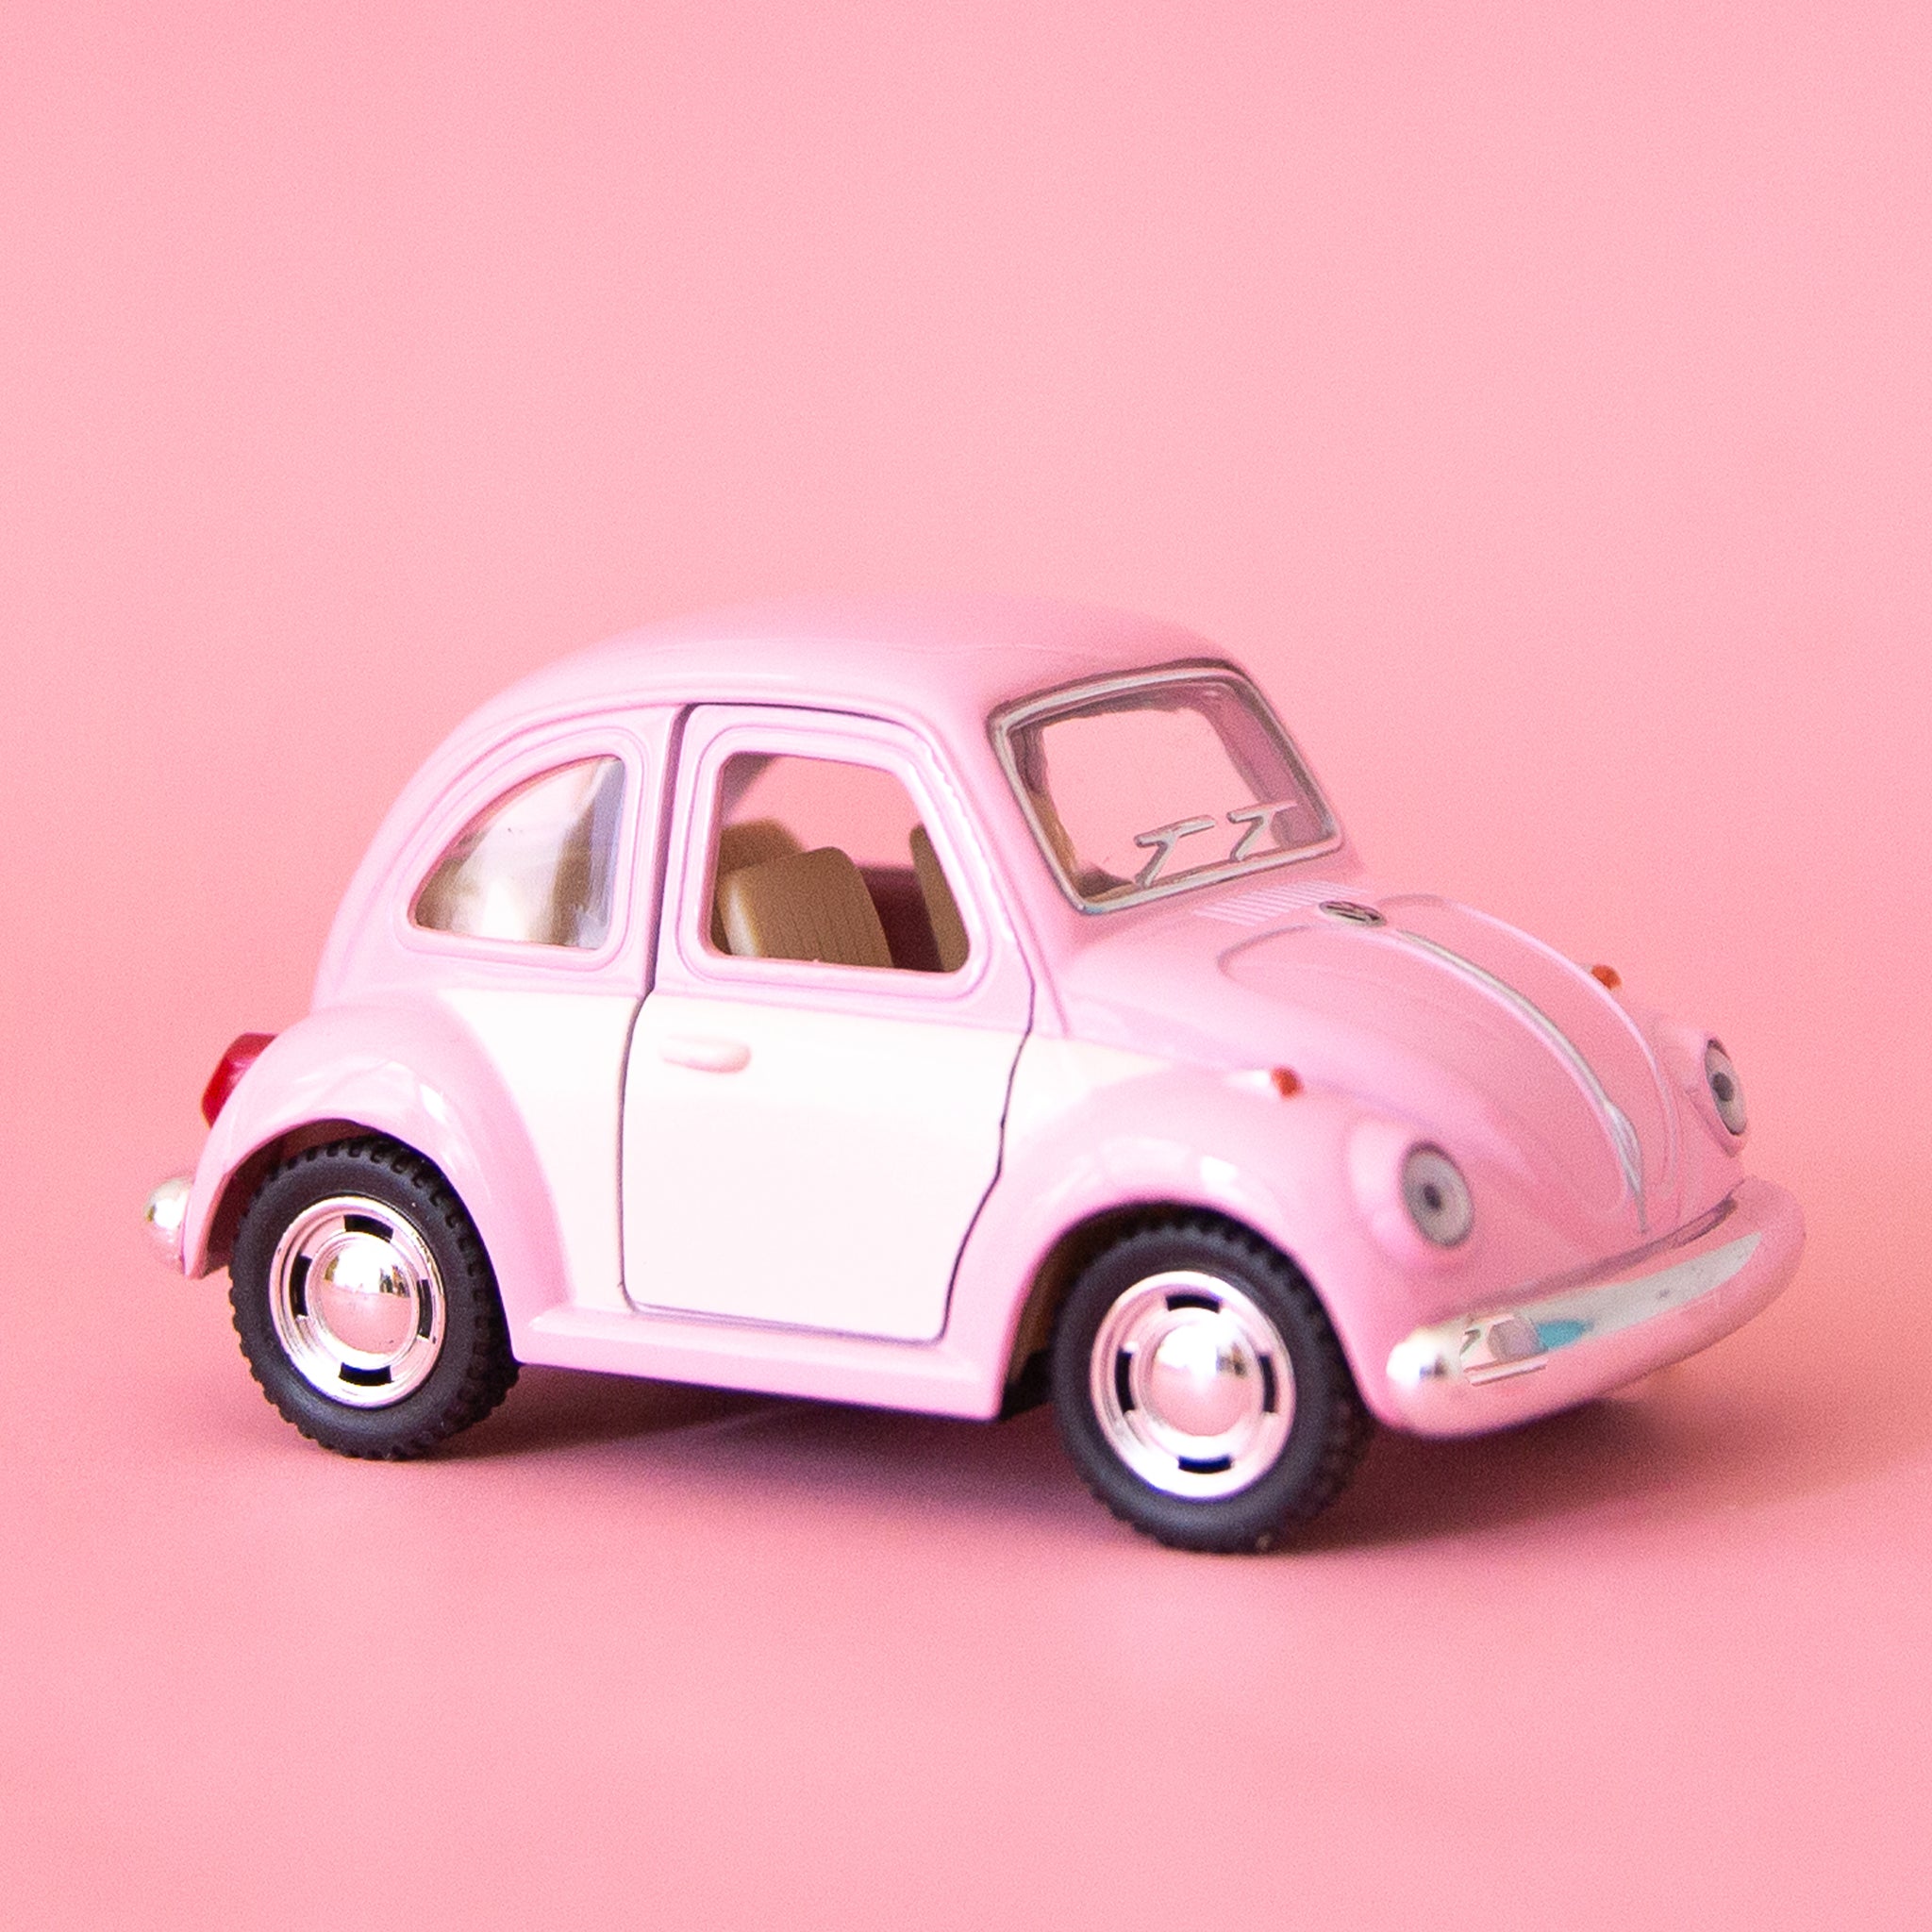 On a pink background is a pink and white two toned toy in the shape of a volkswagen beetle. 